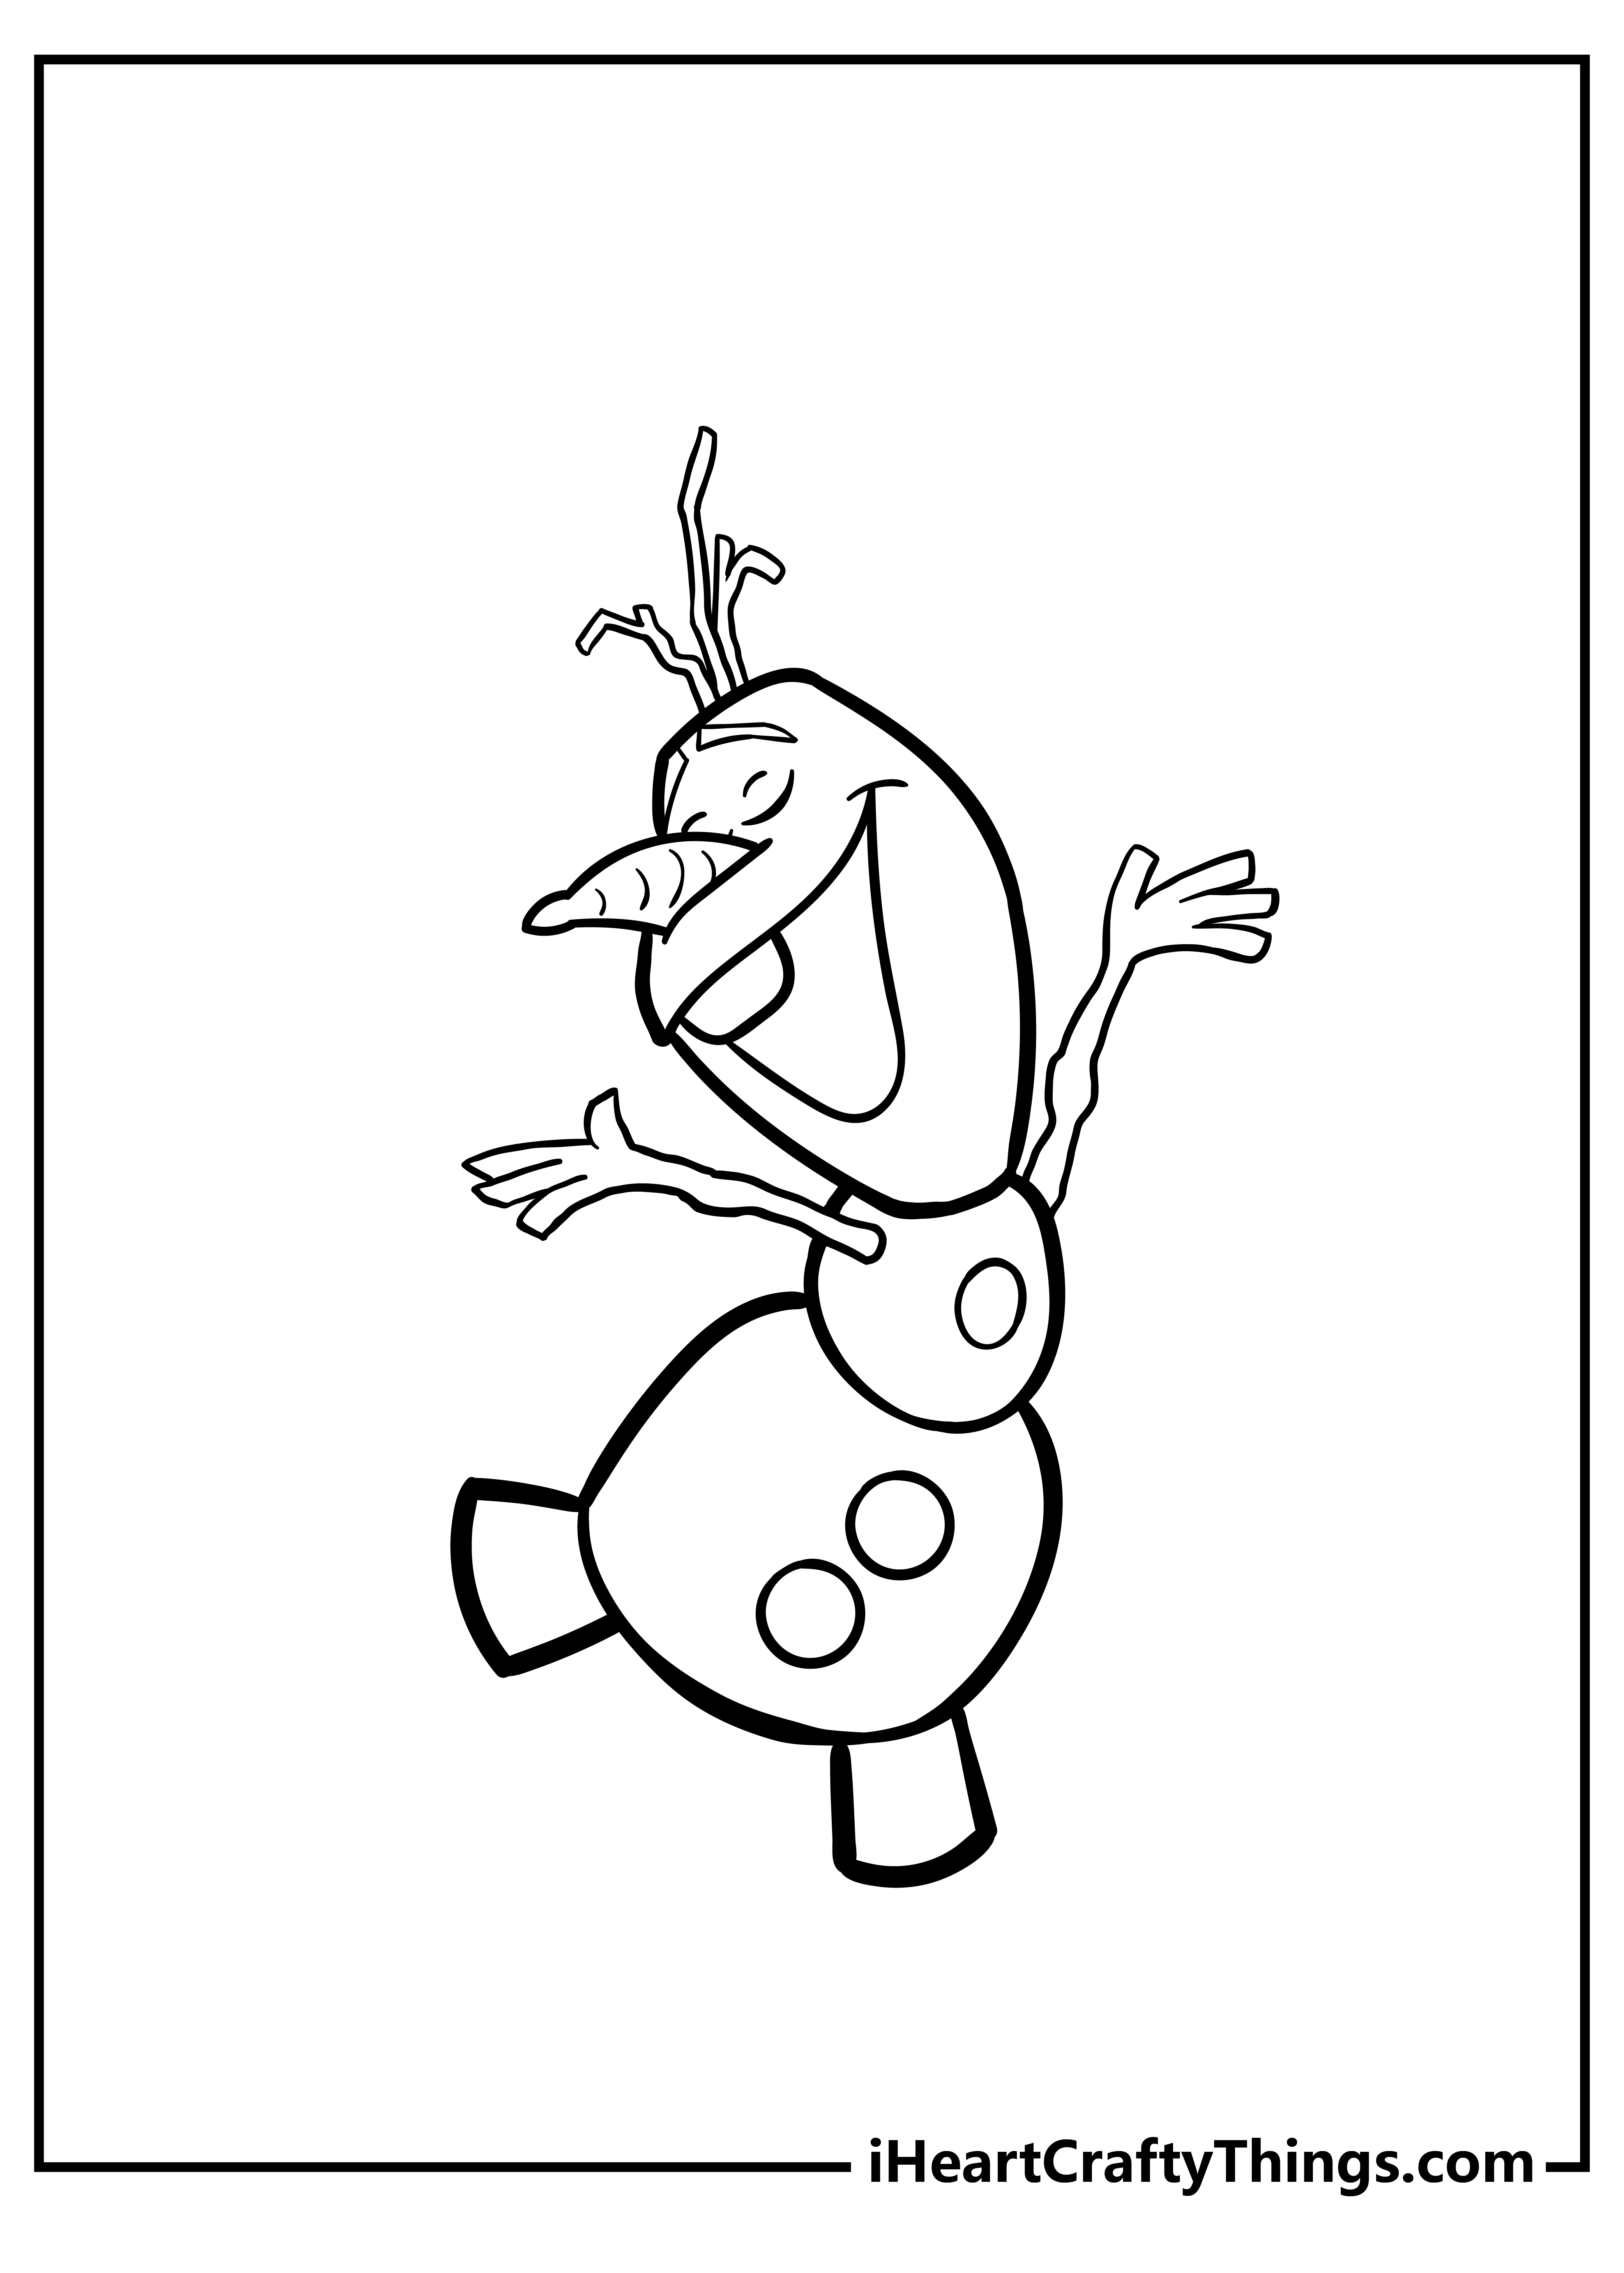 Olaf Coloring Pages for kids free download